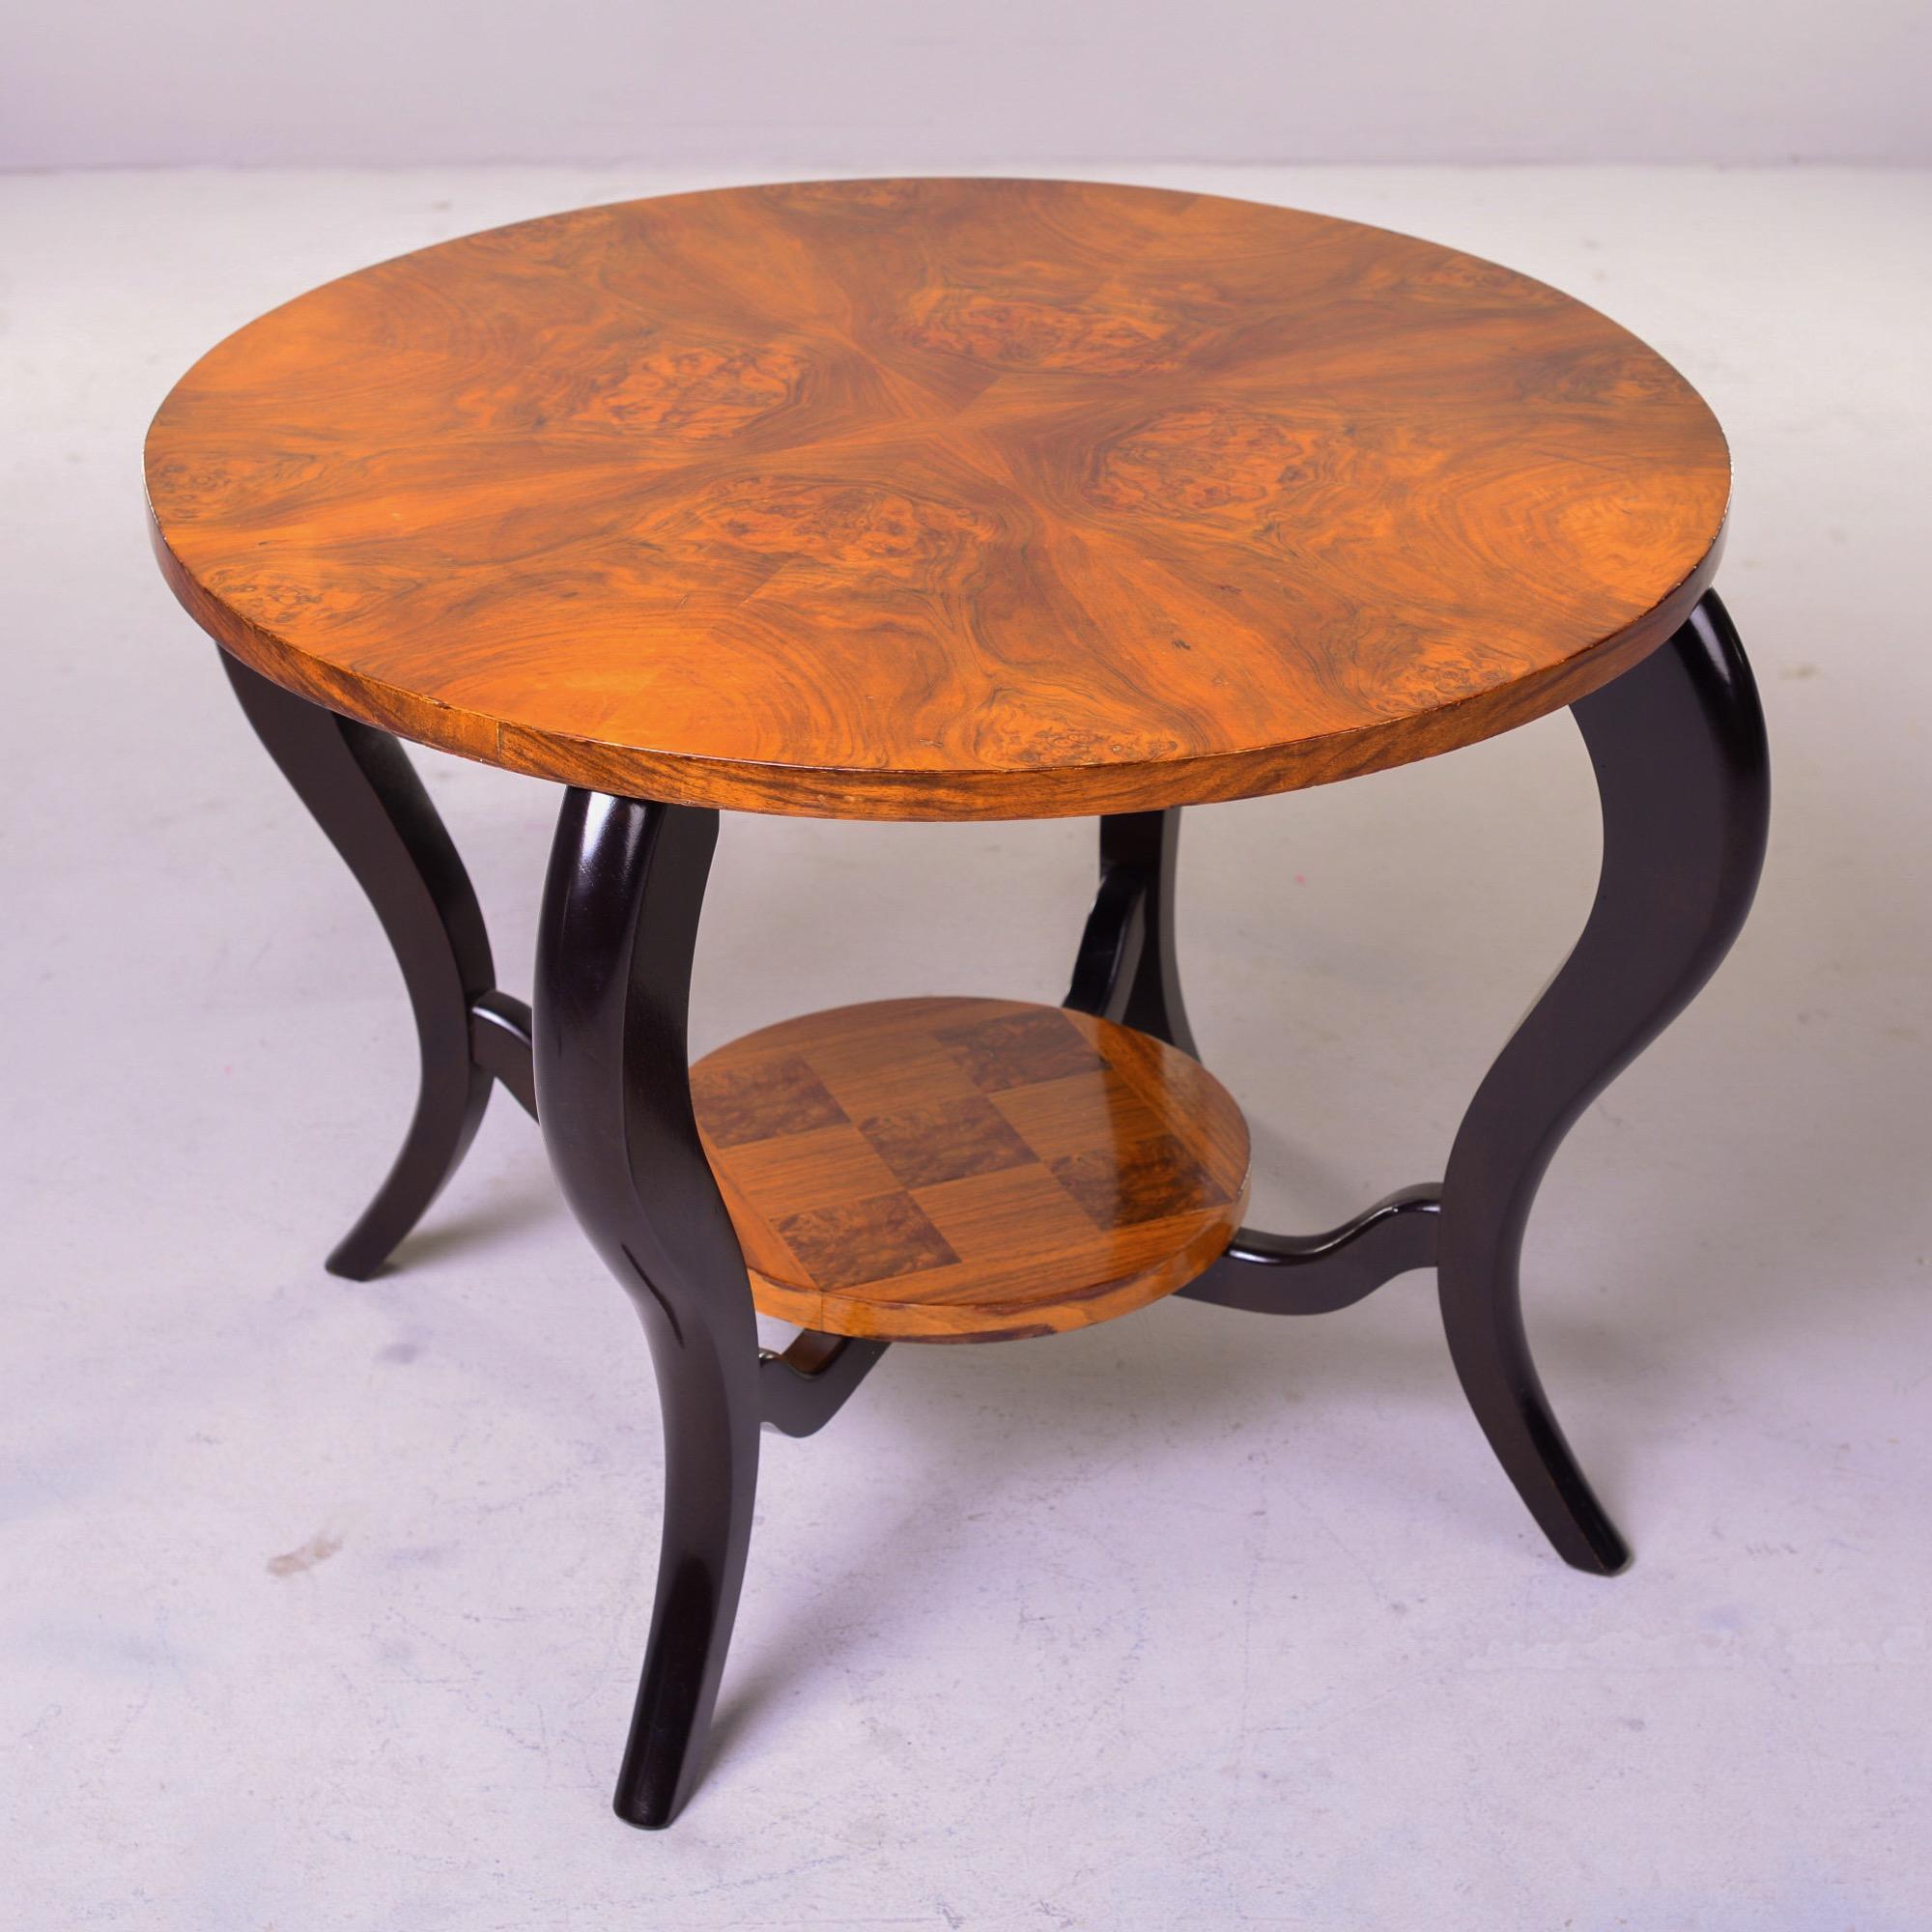 French Art Deco Two Tier Round Burl Wood Table with Black Legs 6